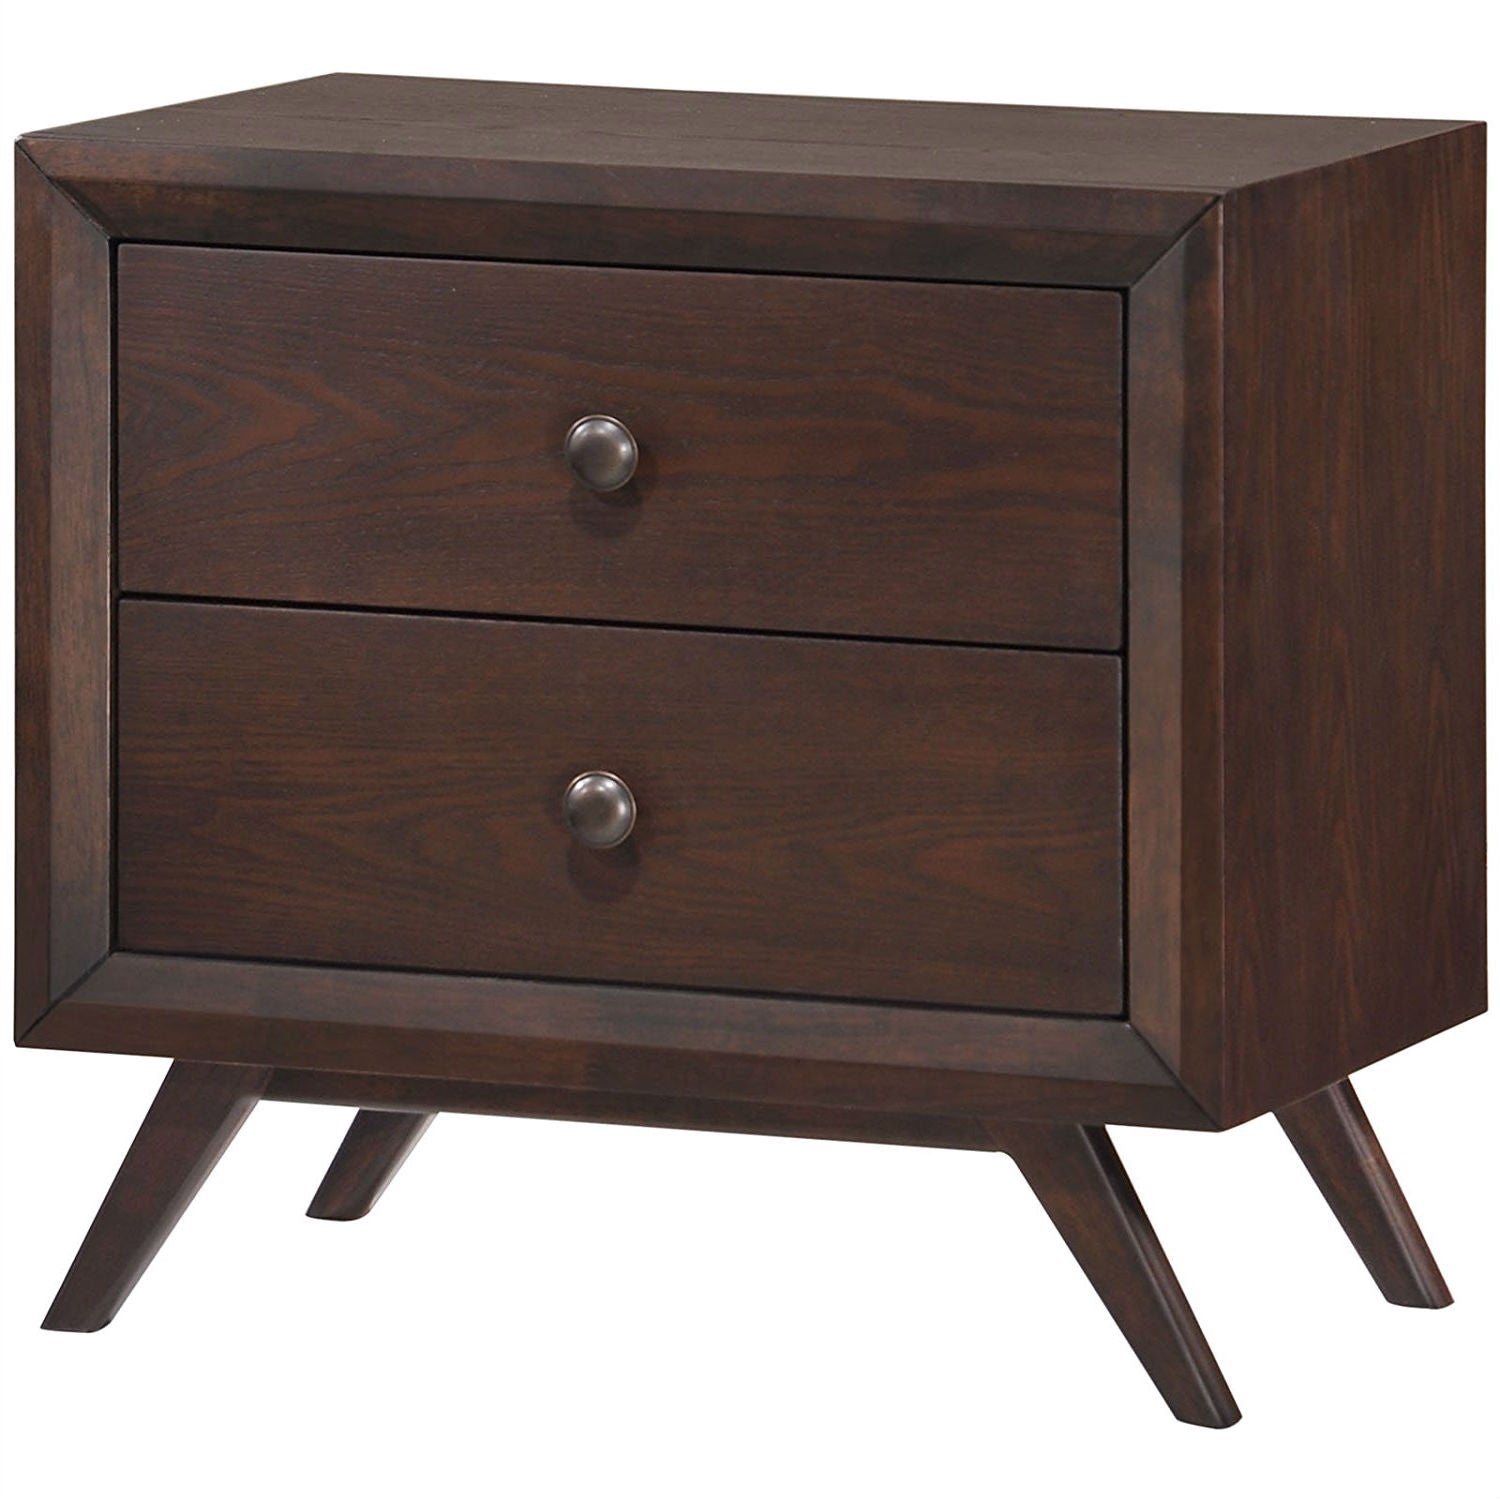 Bedroom > Nightstand And Dressers - Mid-Century Modern Style End Table Nightstand In Cappuccino Wood Finish